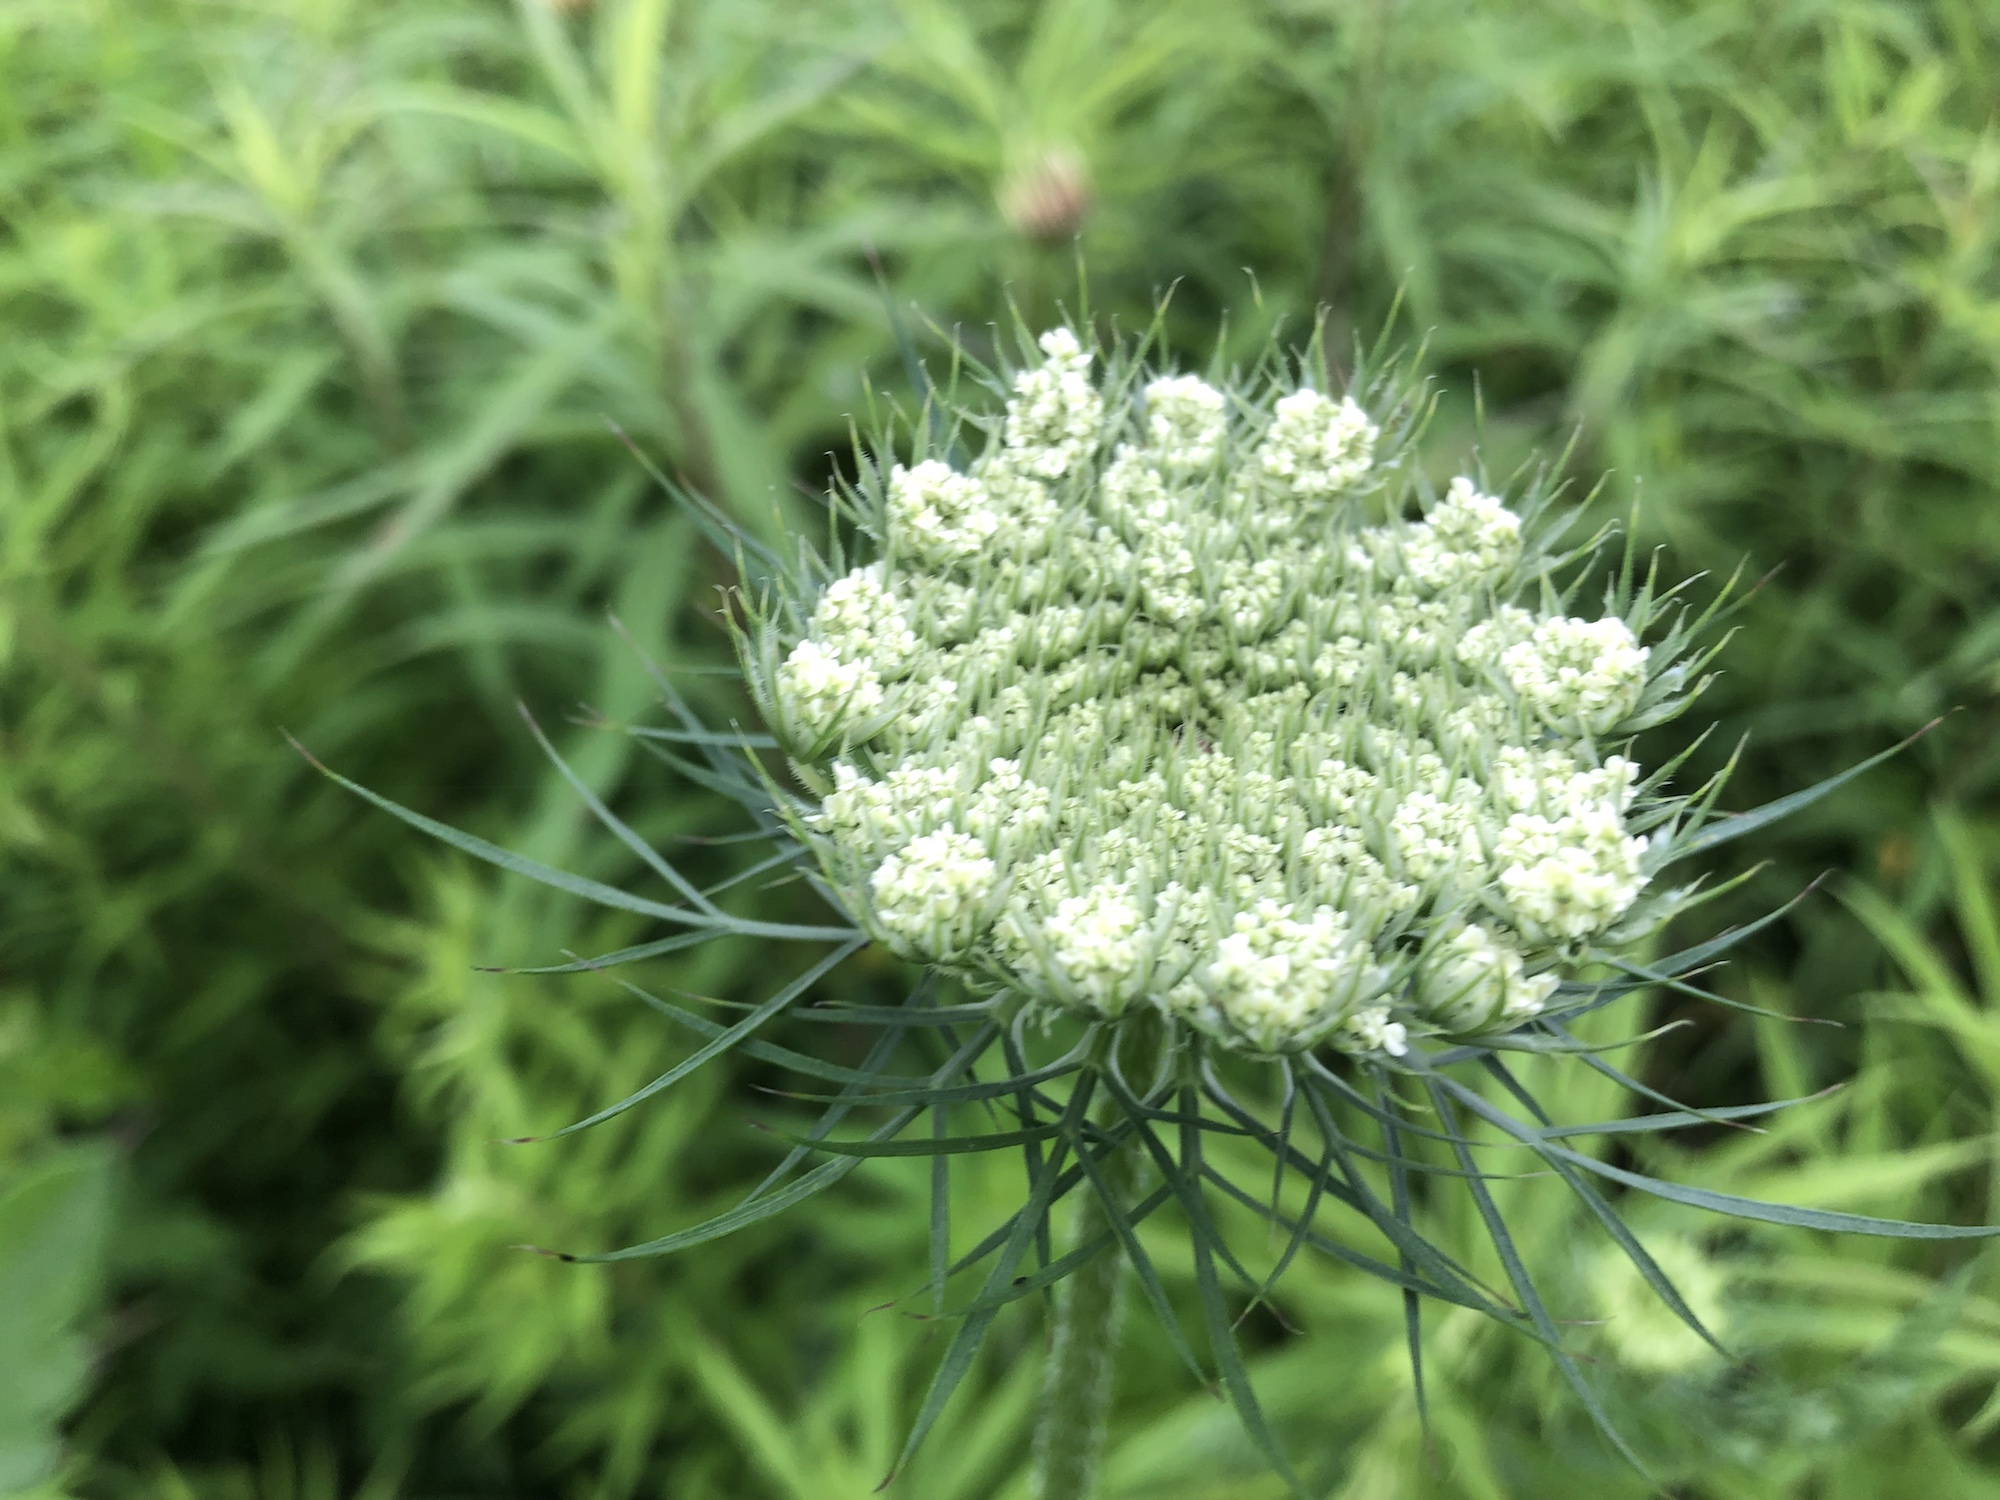 Queen Anne's Lace on bank of retaining pond on the corner of Nakoma Road and Manitou Way in Madison, WI on June 24, 2019.